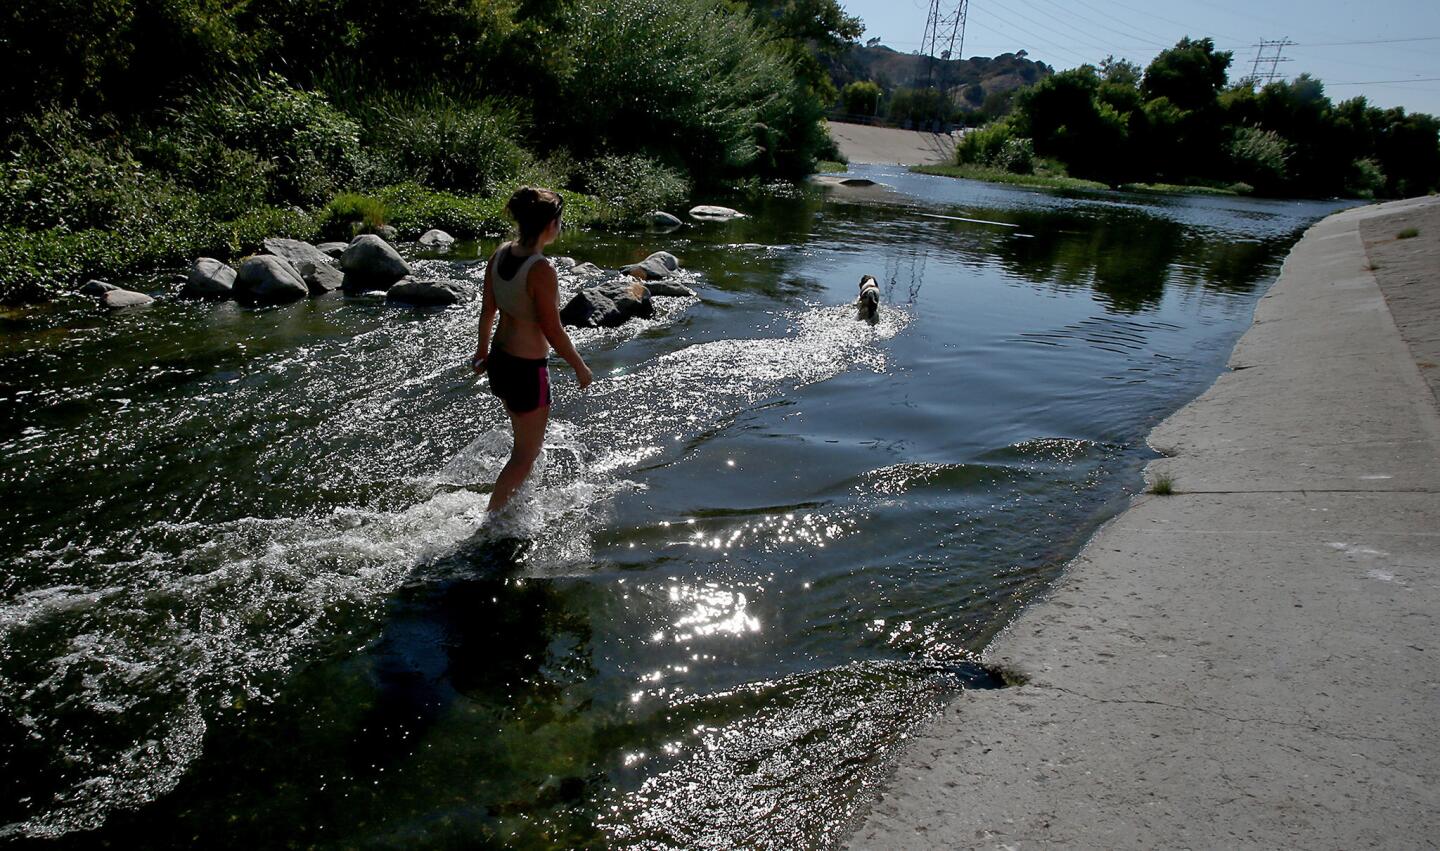 Glendale resident Sarita Vidal and her springer spaniel, Jeni, cool off in the Glendale Narrows area of the Los Angeles River. Renowned architect Frank Gehry is working with Los Angeles officials in the public and private sector to draft a new master plan for the redevelopment of the river.